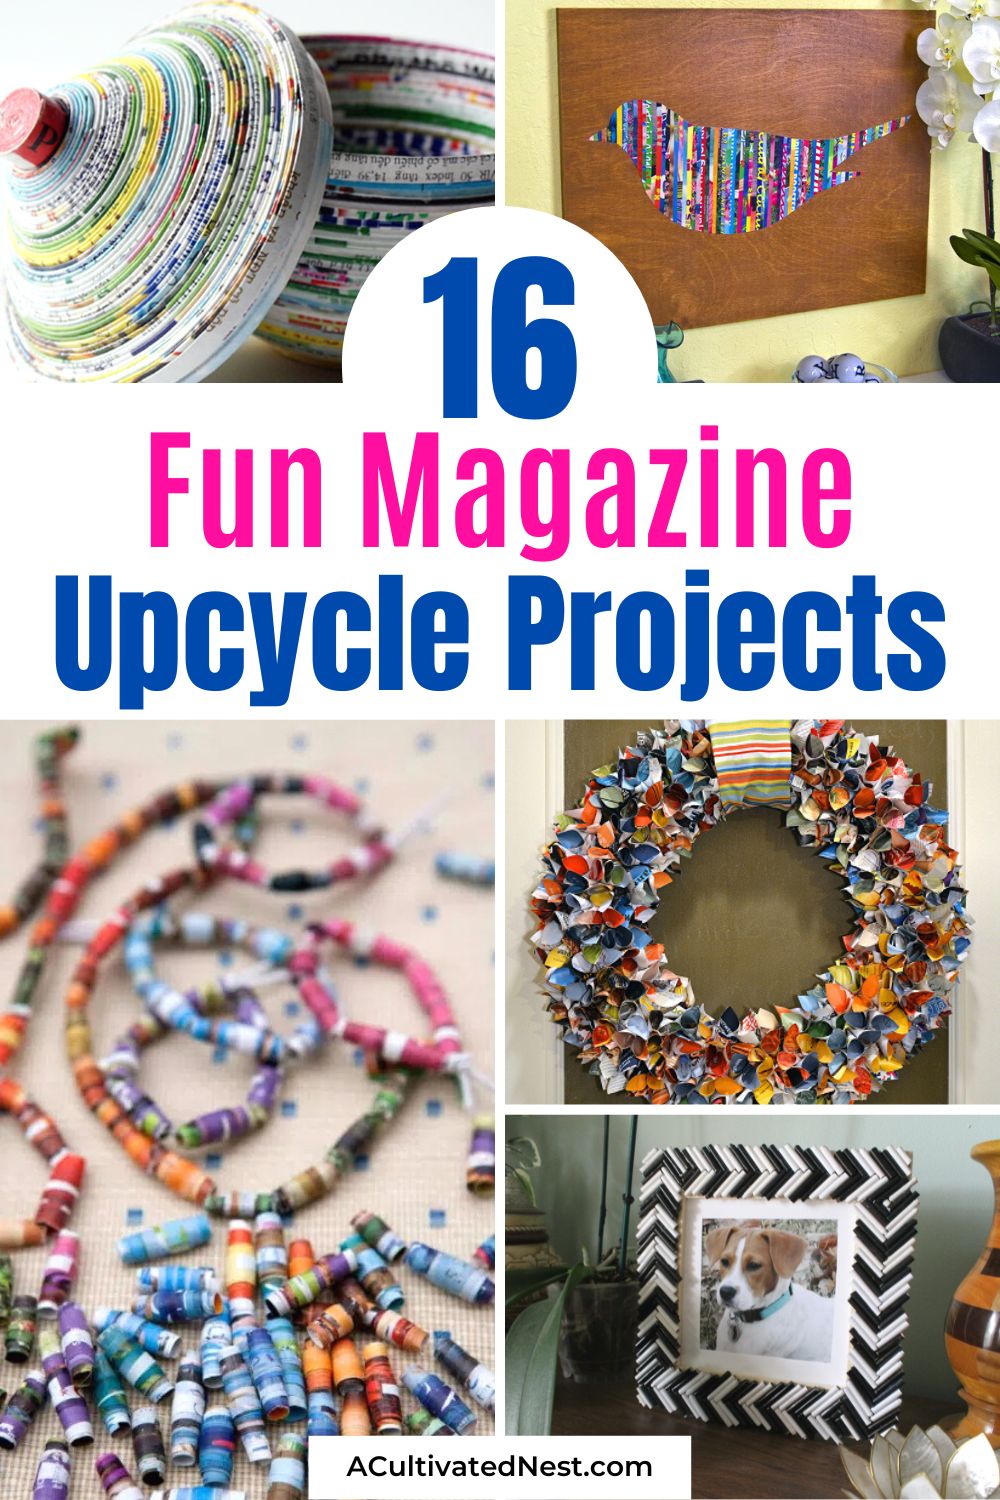 16 Fun Magazine Upcycle Projects- If you're tired of old magazines cluttering up your home, then you should declutter your home and recycle at the same time with these fun magazine upcycle projects! | ways to repurpose magazines, magazine recycling ideas, #repurpose #recycle #DIY #crafting #ACultivatedNest